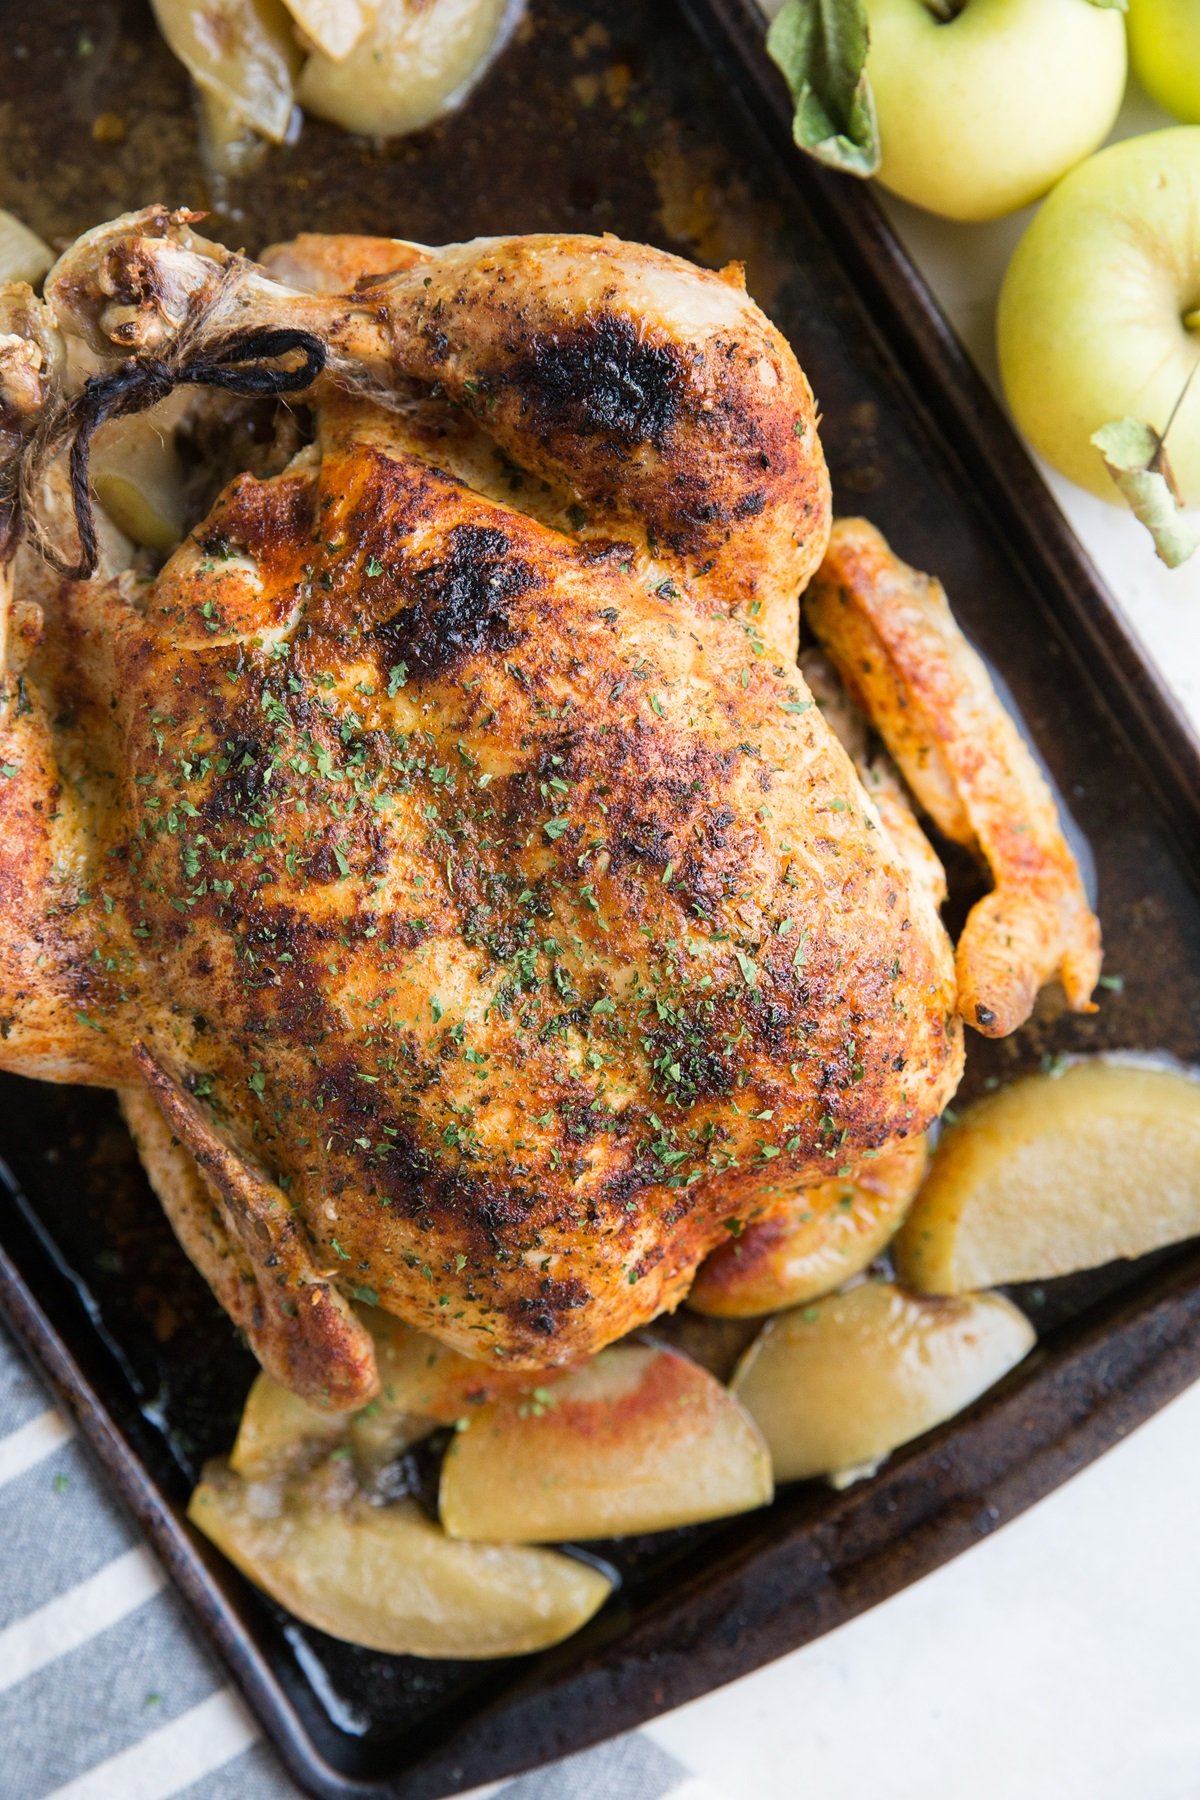 Instant Pot Whole Chicken and apples is an incredibly delicious healthy dinner recipe! An easy to prepare method for cooking a whole chicken.